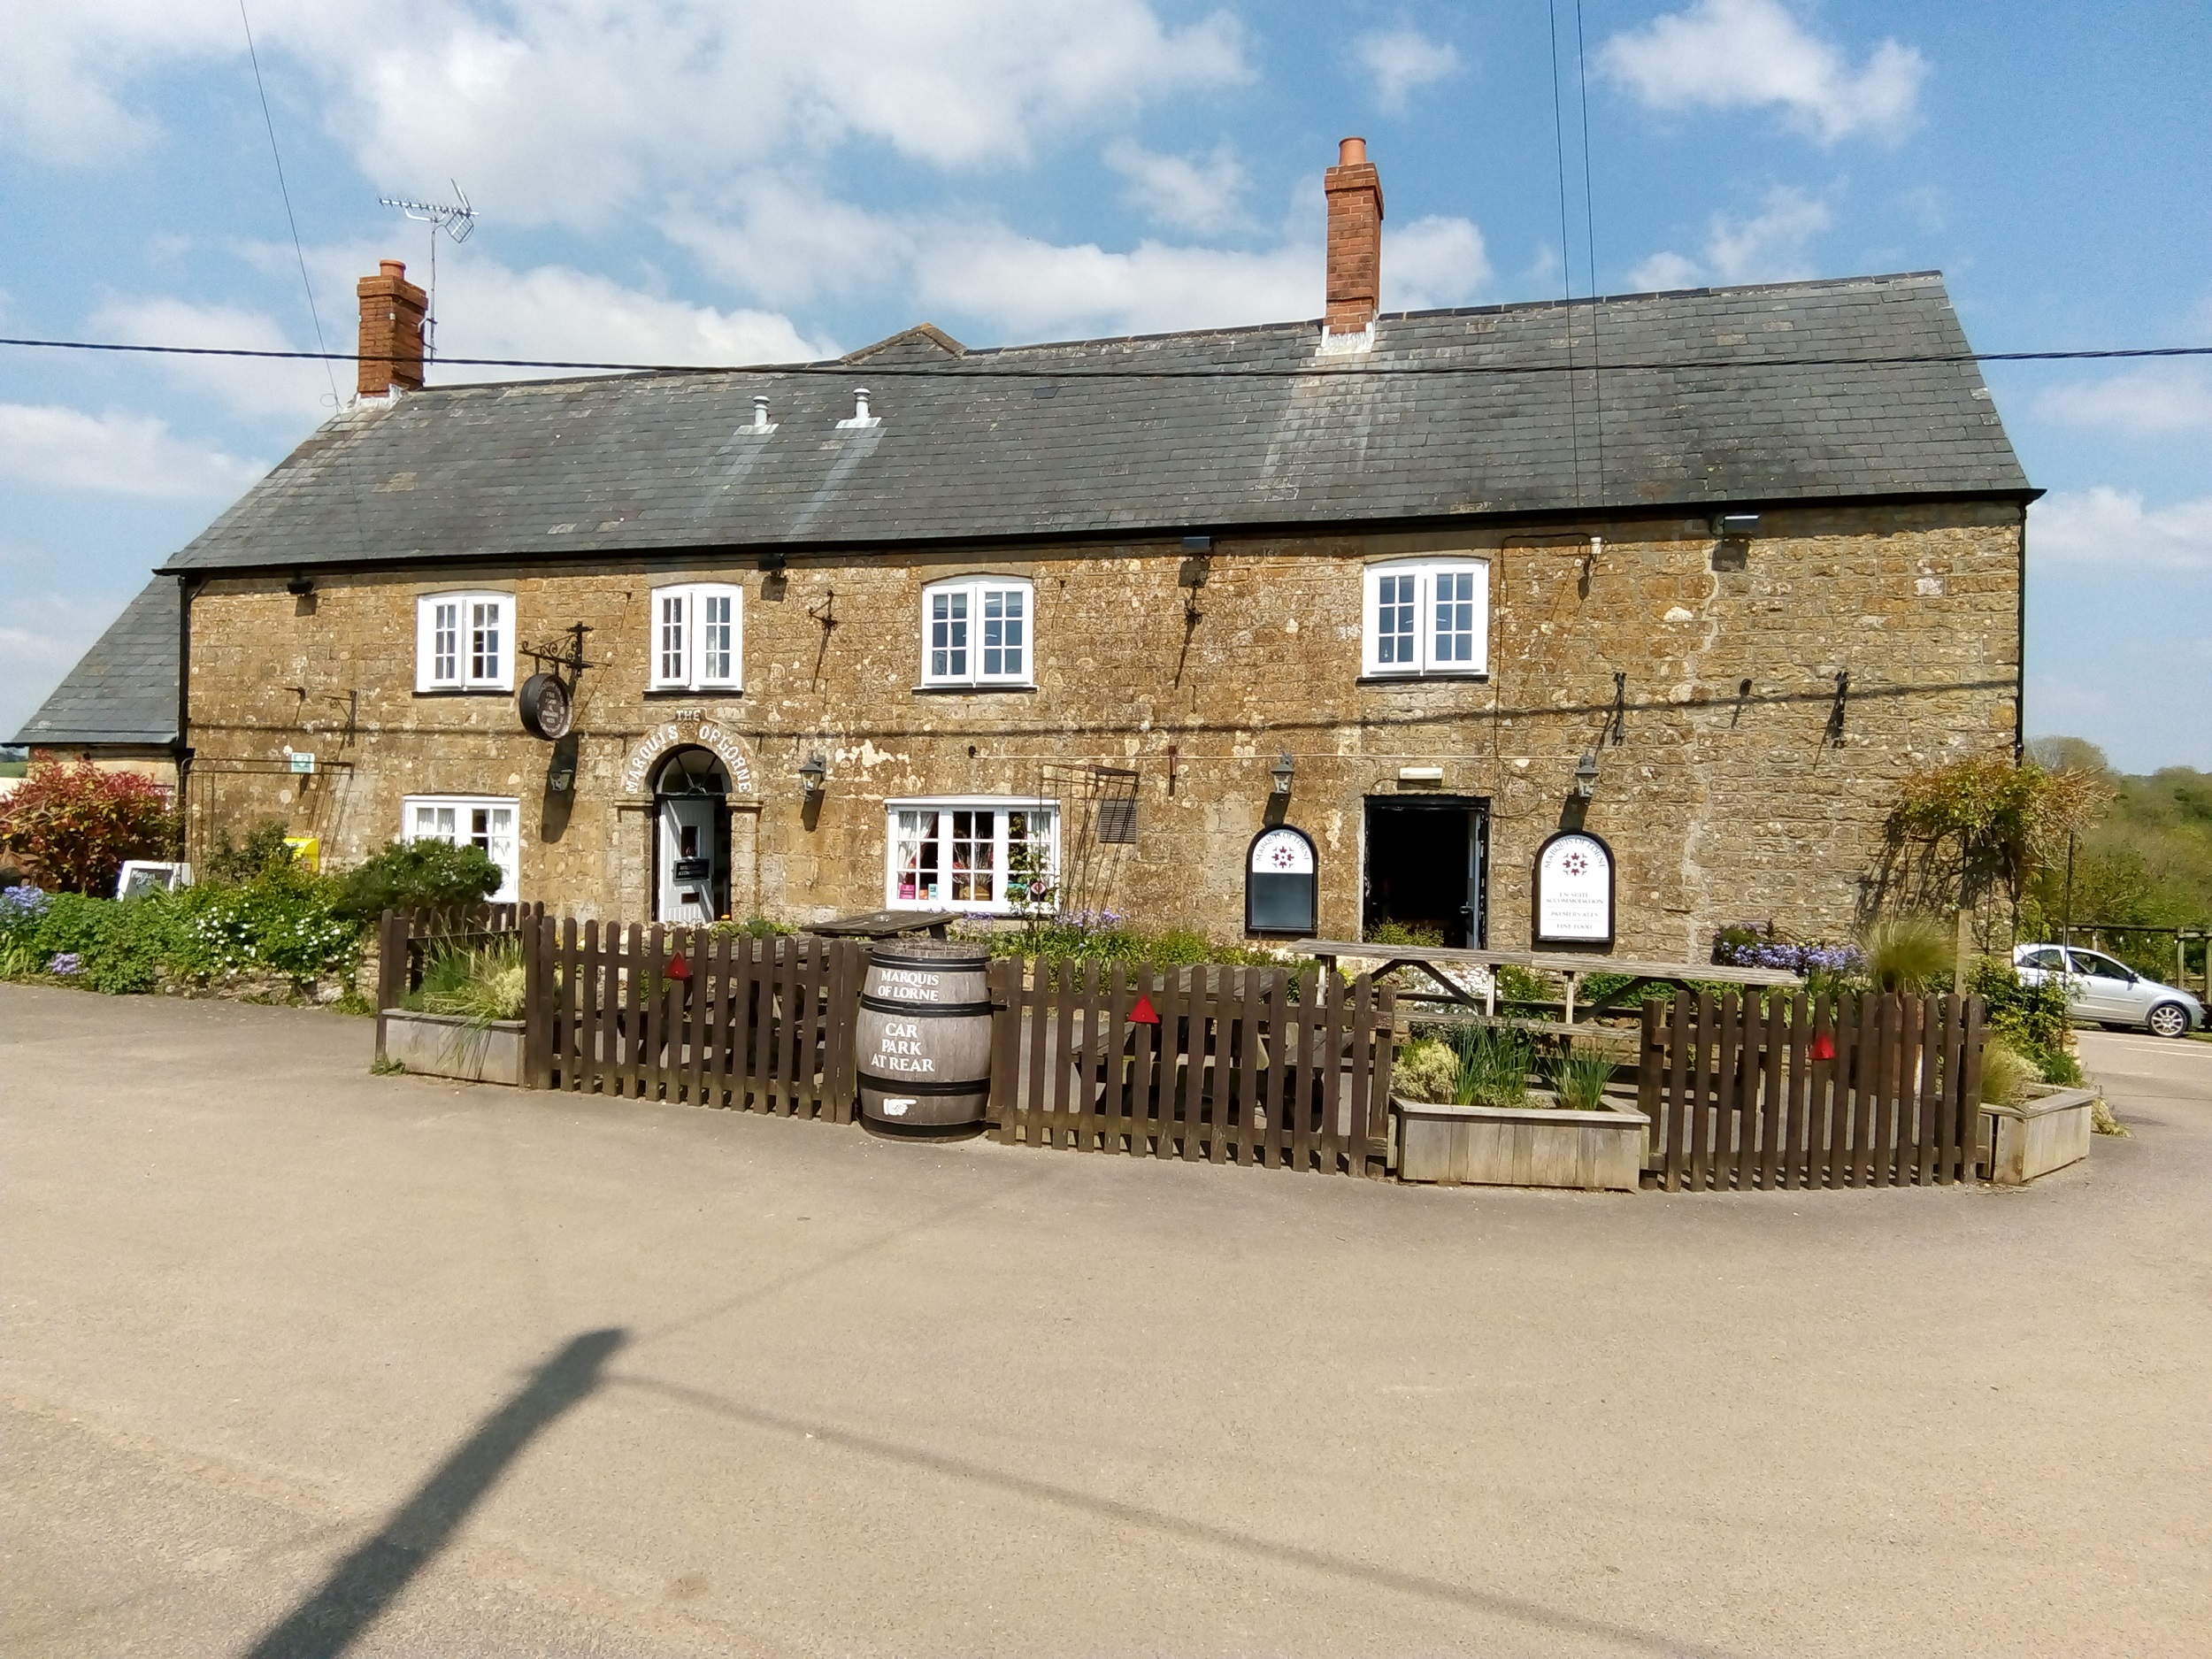 A rural Dorset pub built in stone, and with a dark tiles roof on a sunny day. Seating is visible in the rustic front garden.